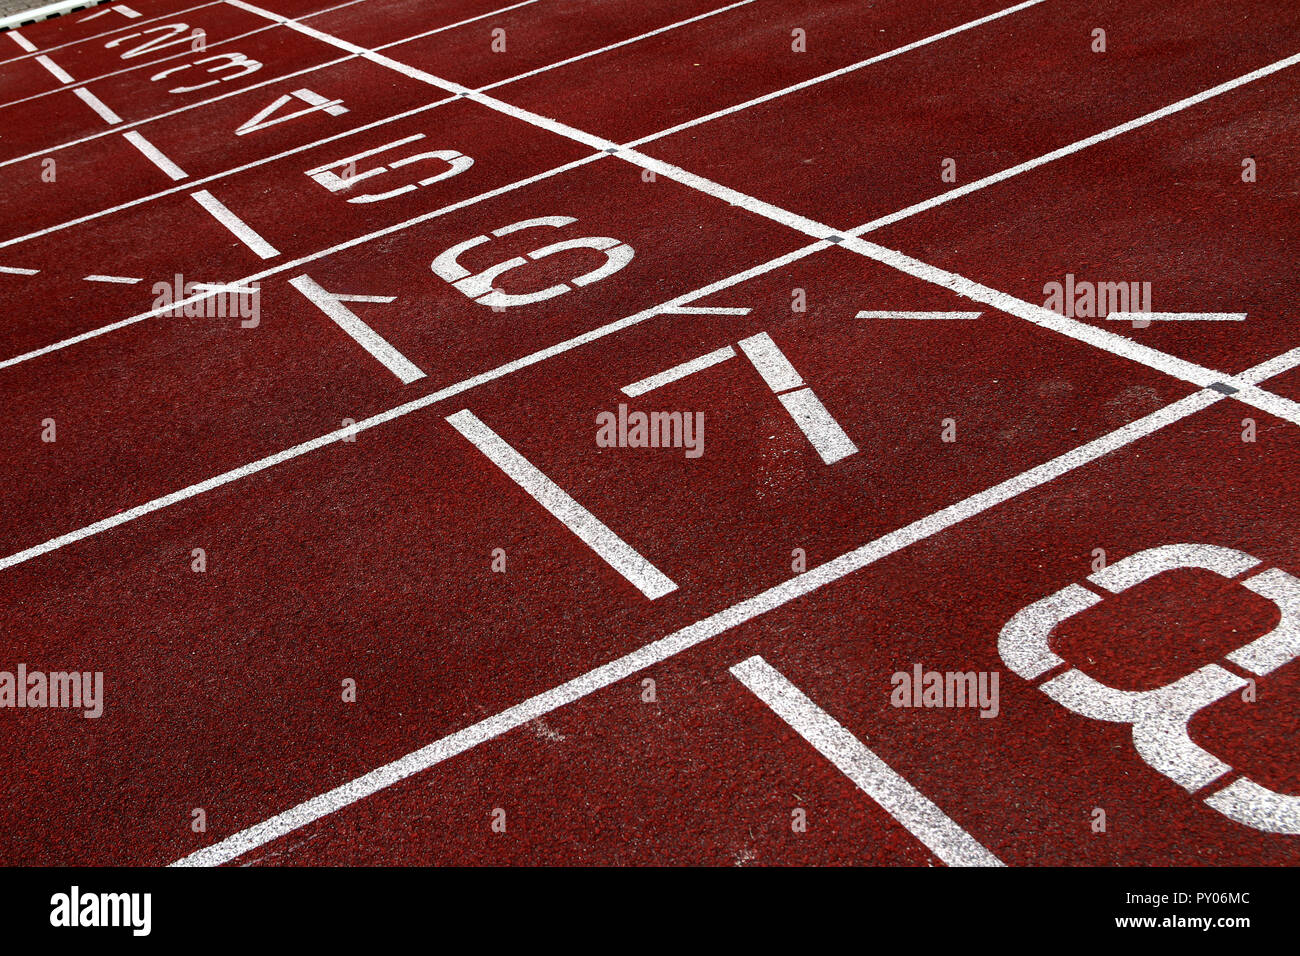 Eight lanes numbered on an athletic track Stock Photo